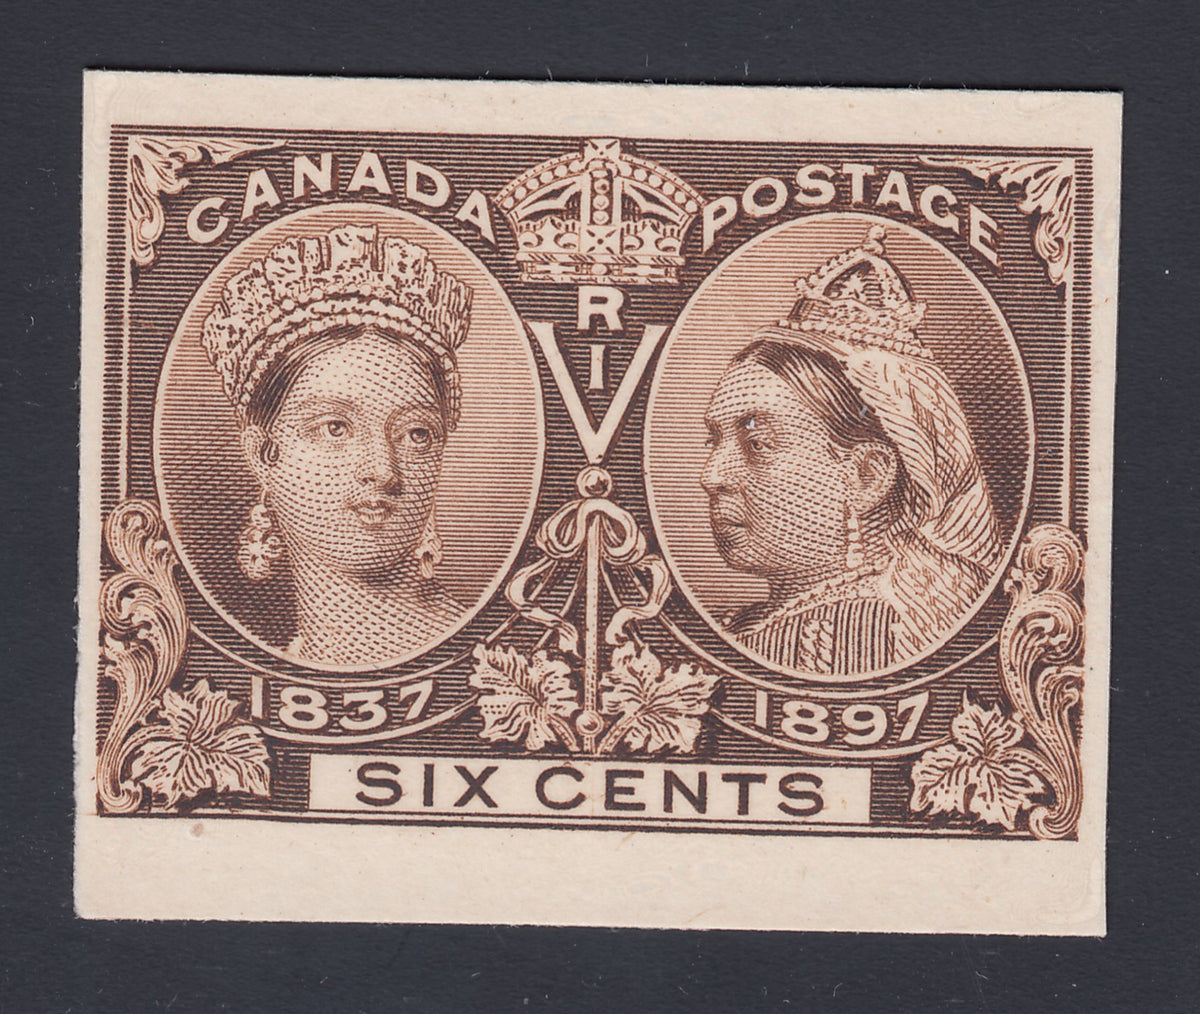 0055CA1804 - Canada #55Pi, Mint Plate Proof - Major Re-entry